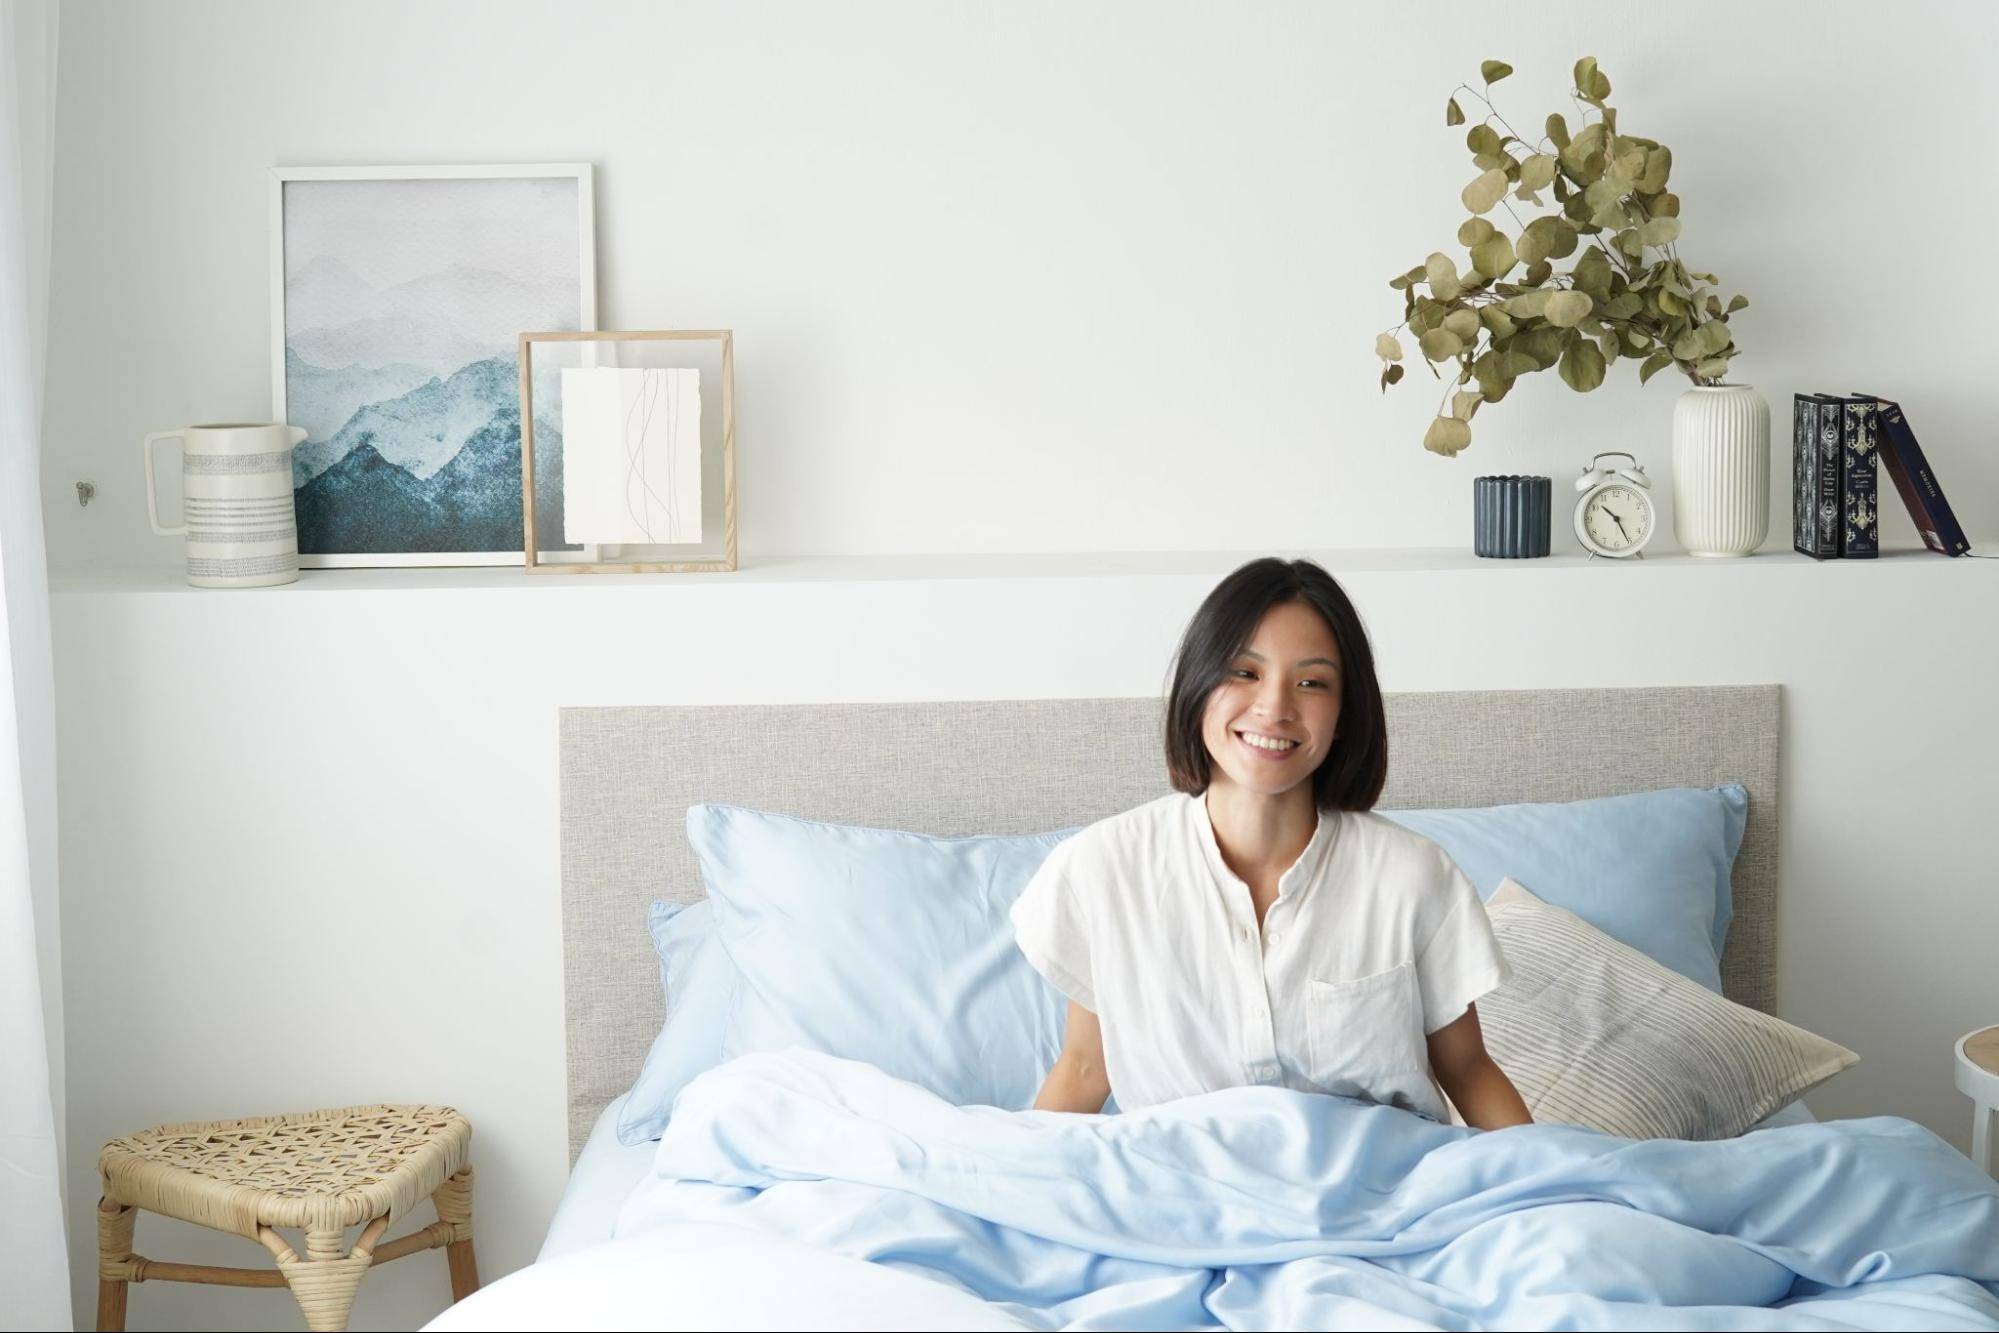 The best bed sheet material to stay cool at night featuring girl sitting on sky blue bed sheets singapore